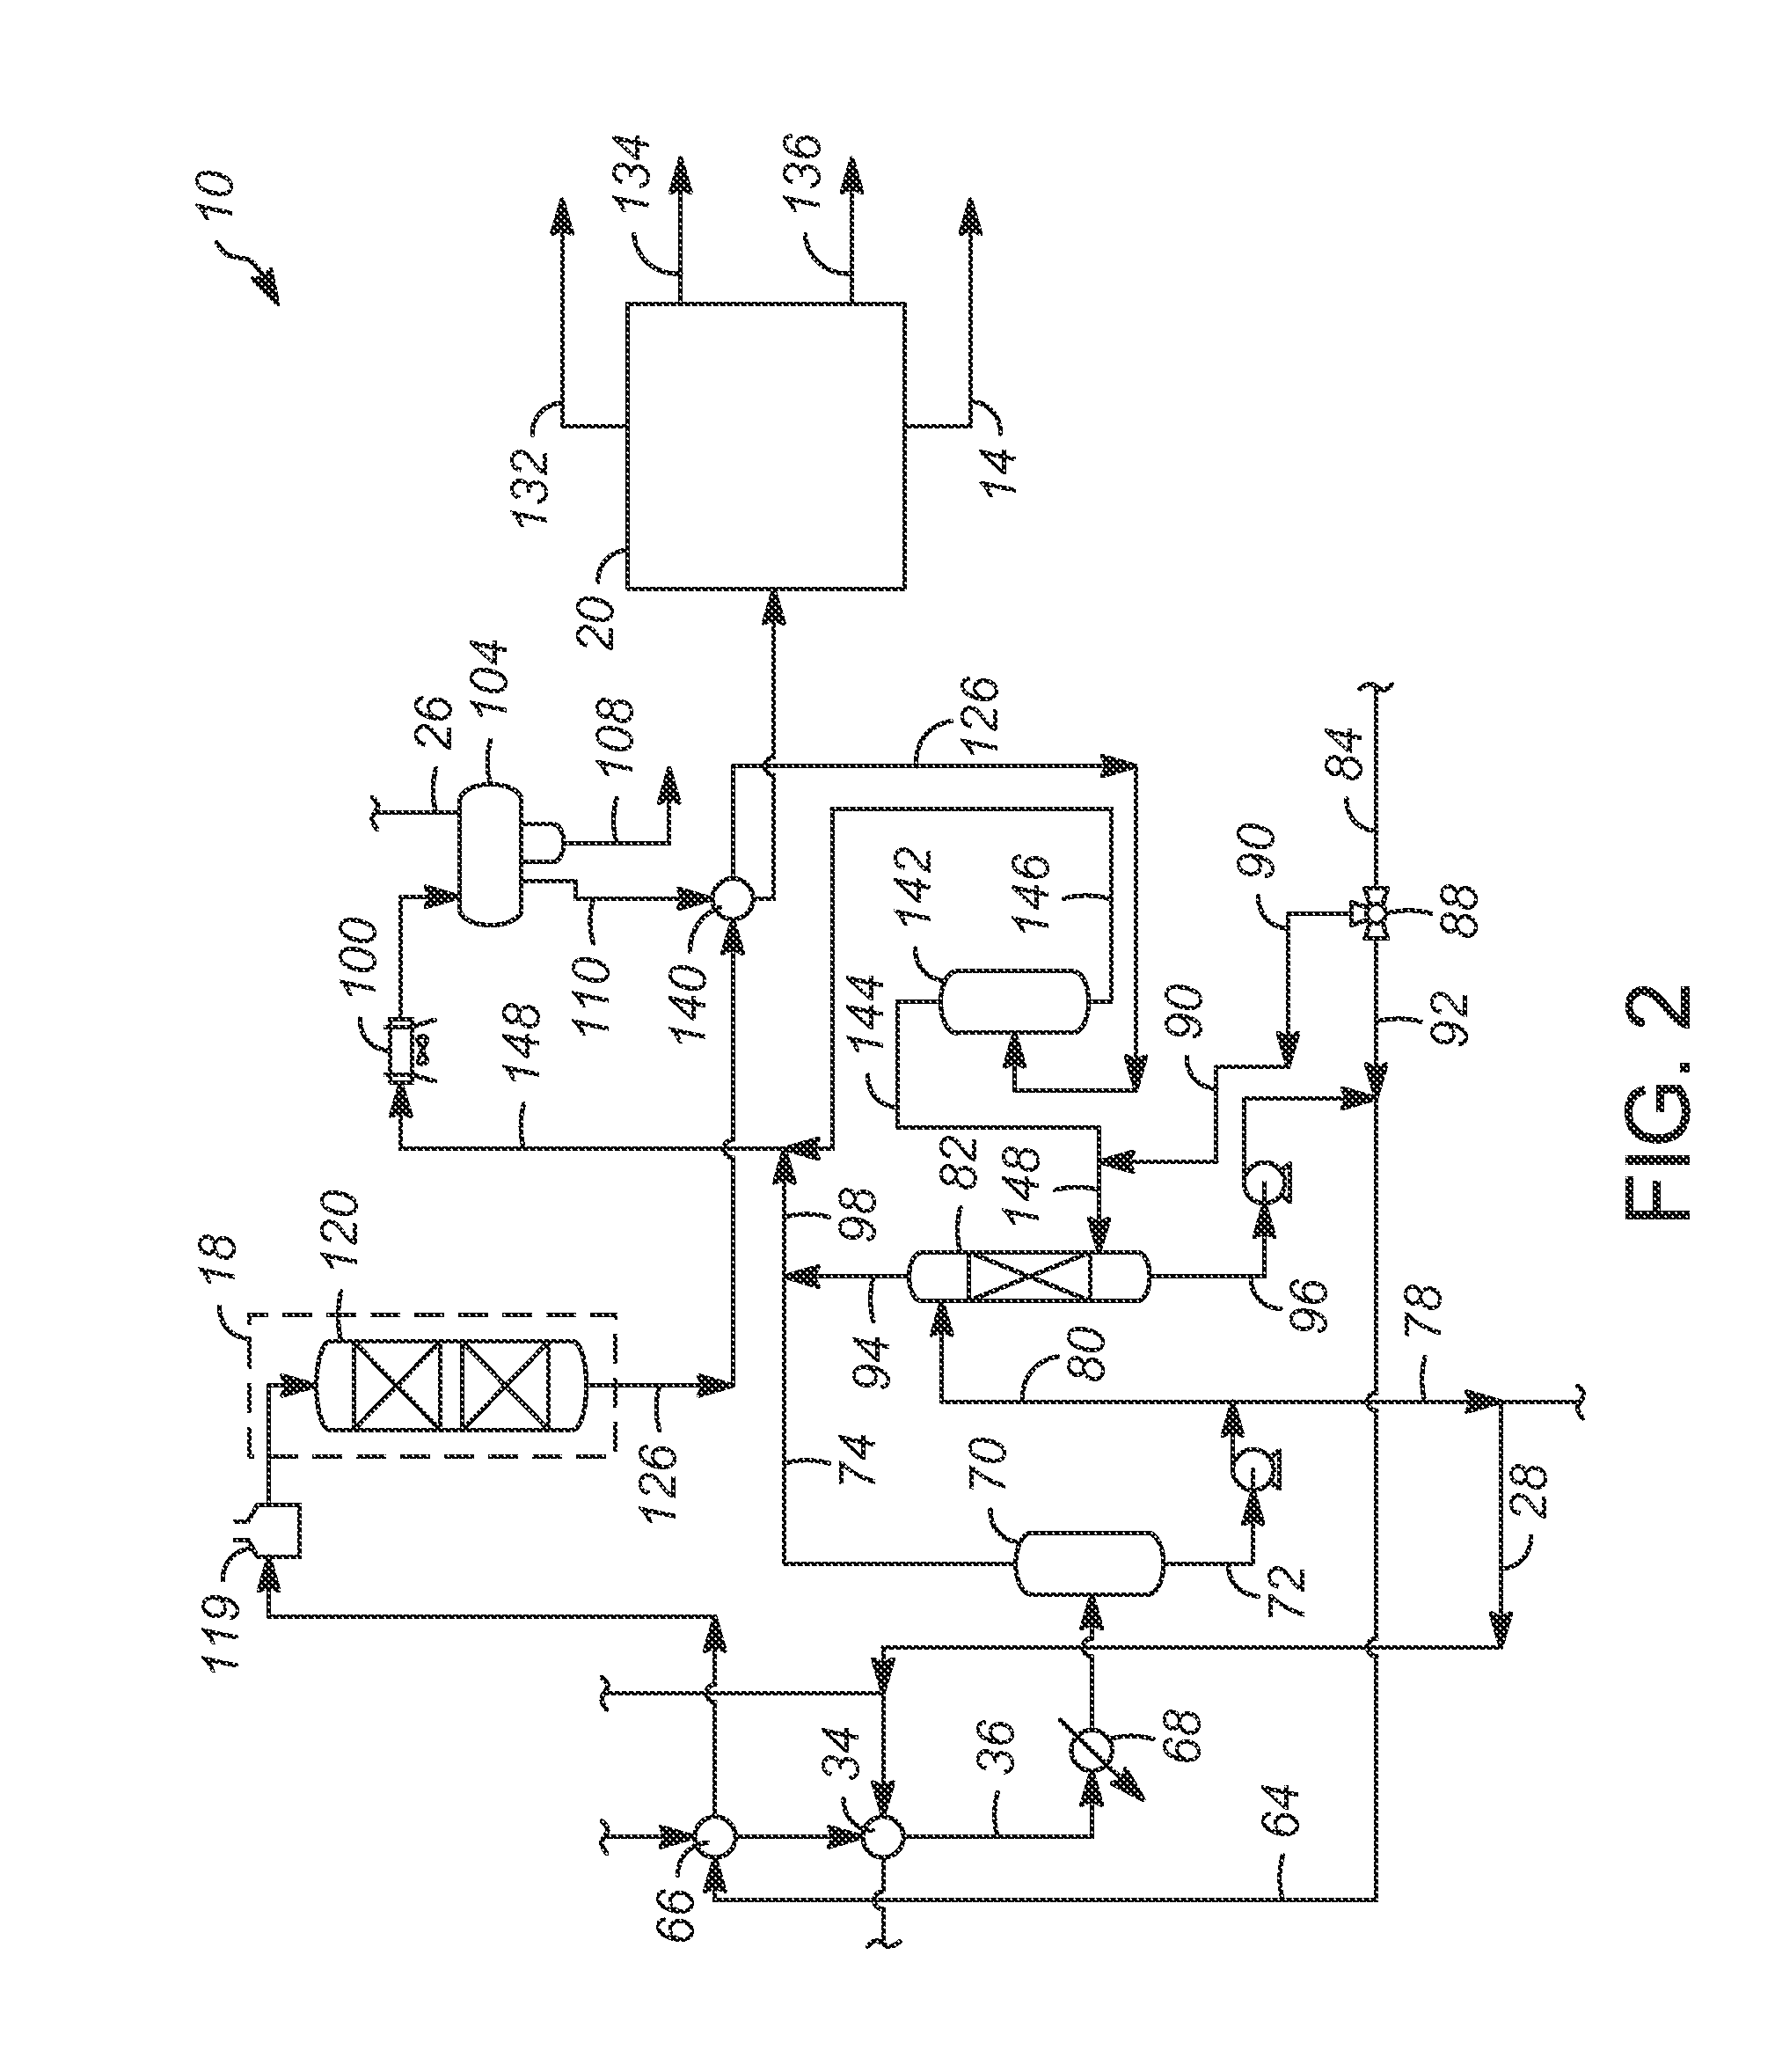 Methods and apparatuses for processing renewable feedstocks